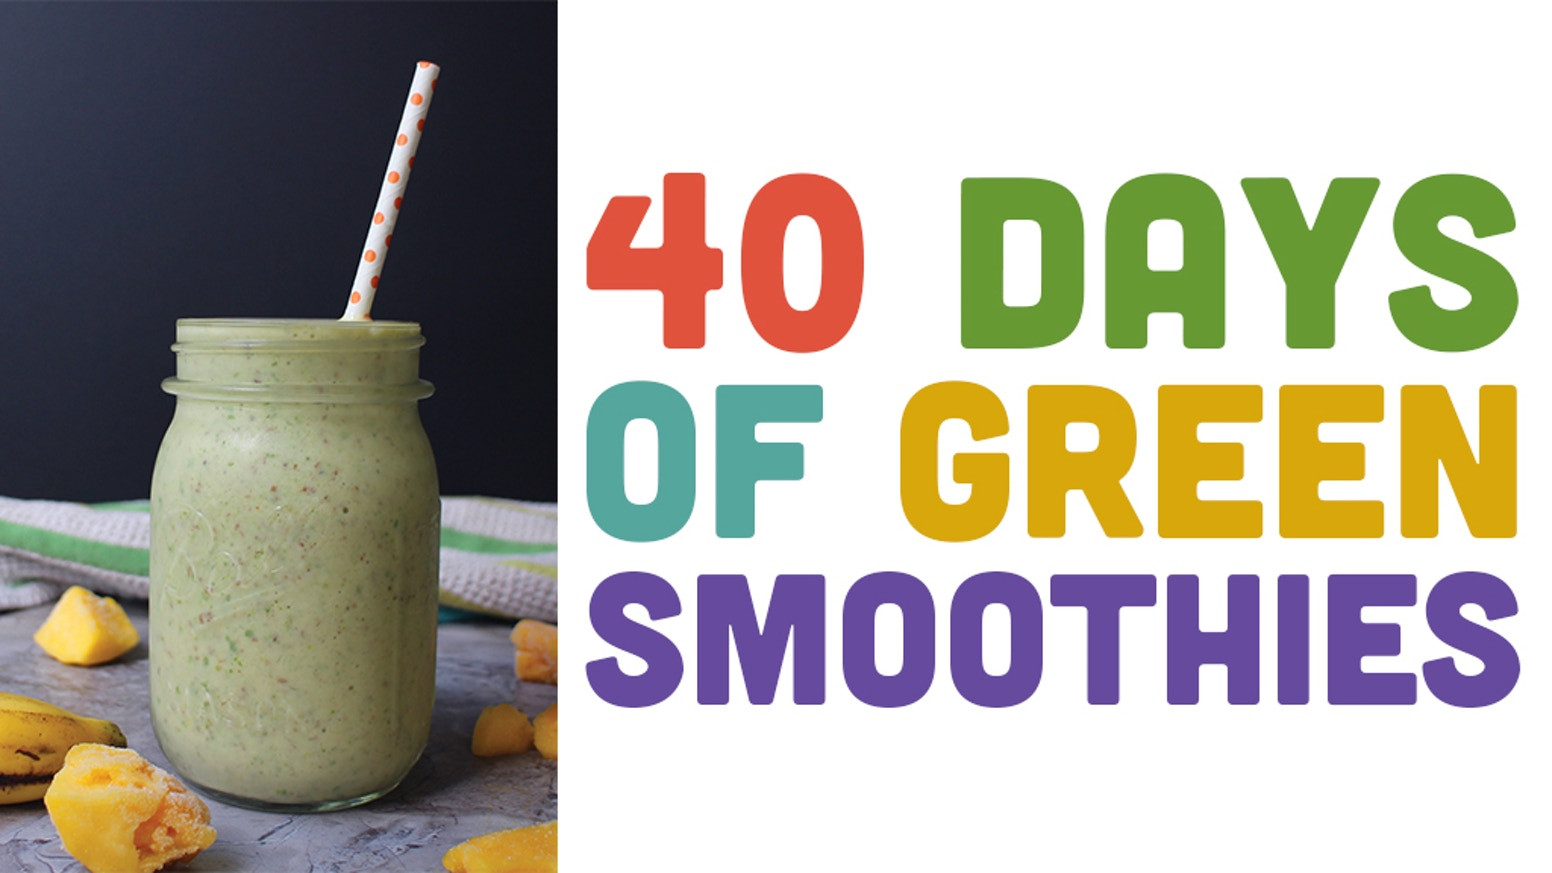 Green Smoothies For Life Pdf
 40 Days of Green Smoothies in PRINT by Becky Striepe